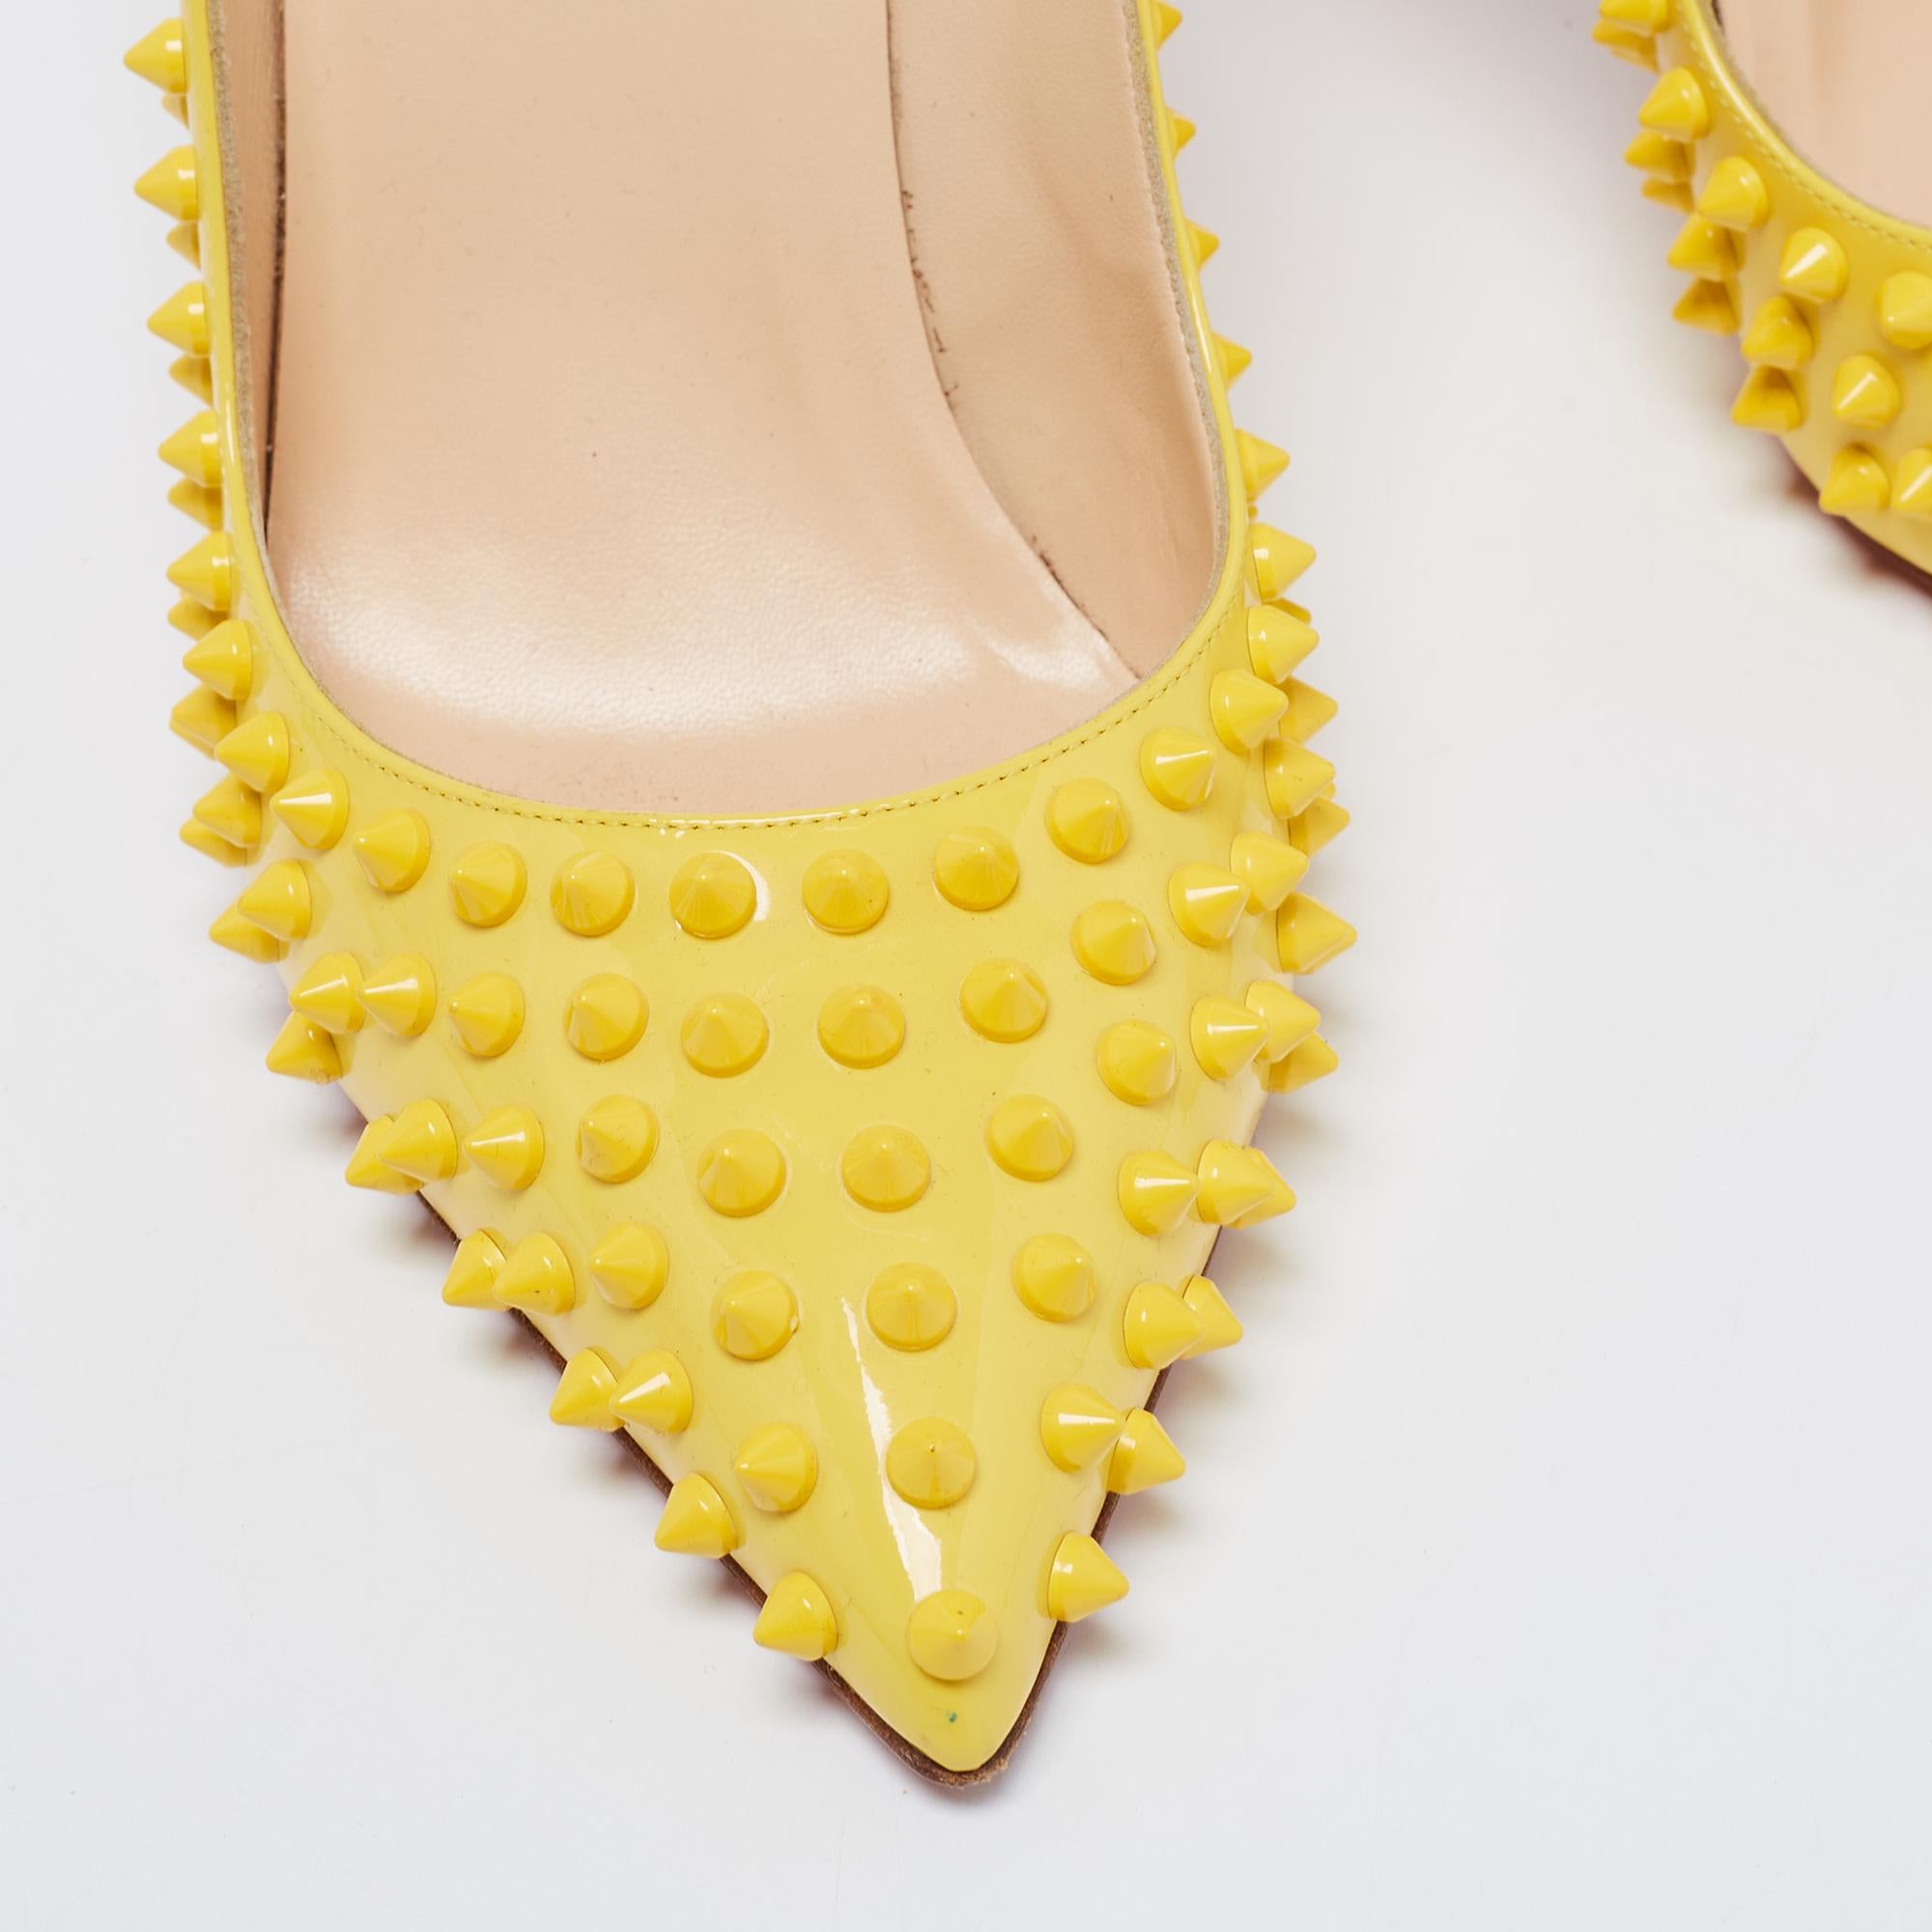 Christian Louboutin Yellow Patent Leather Pigalle Spikes Pumps Size 41 3